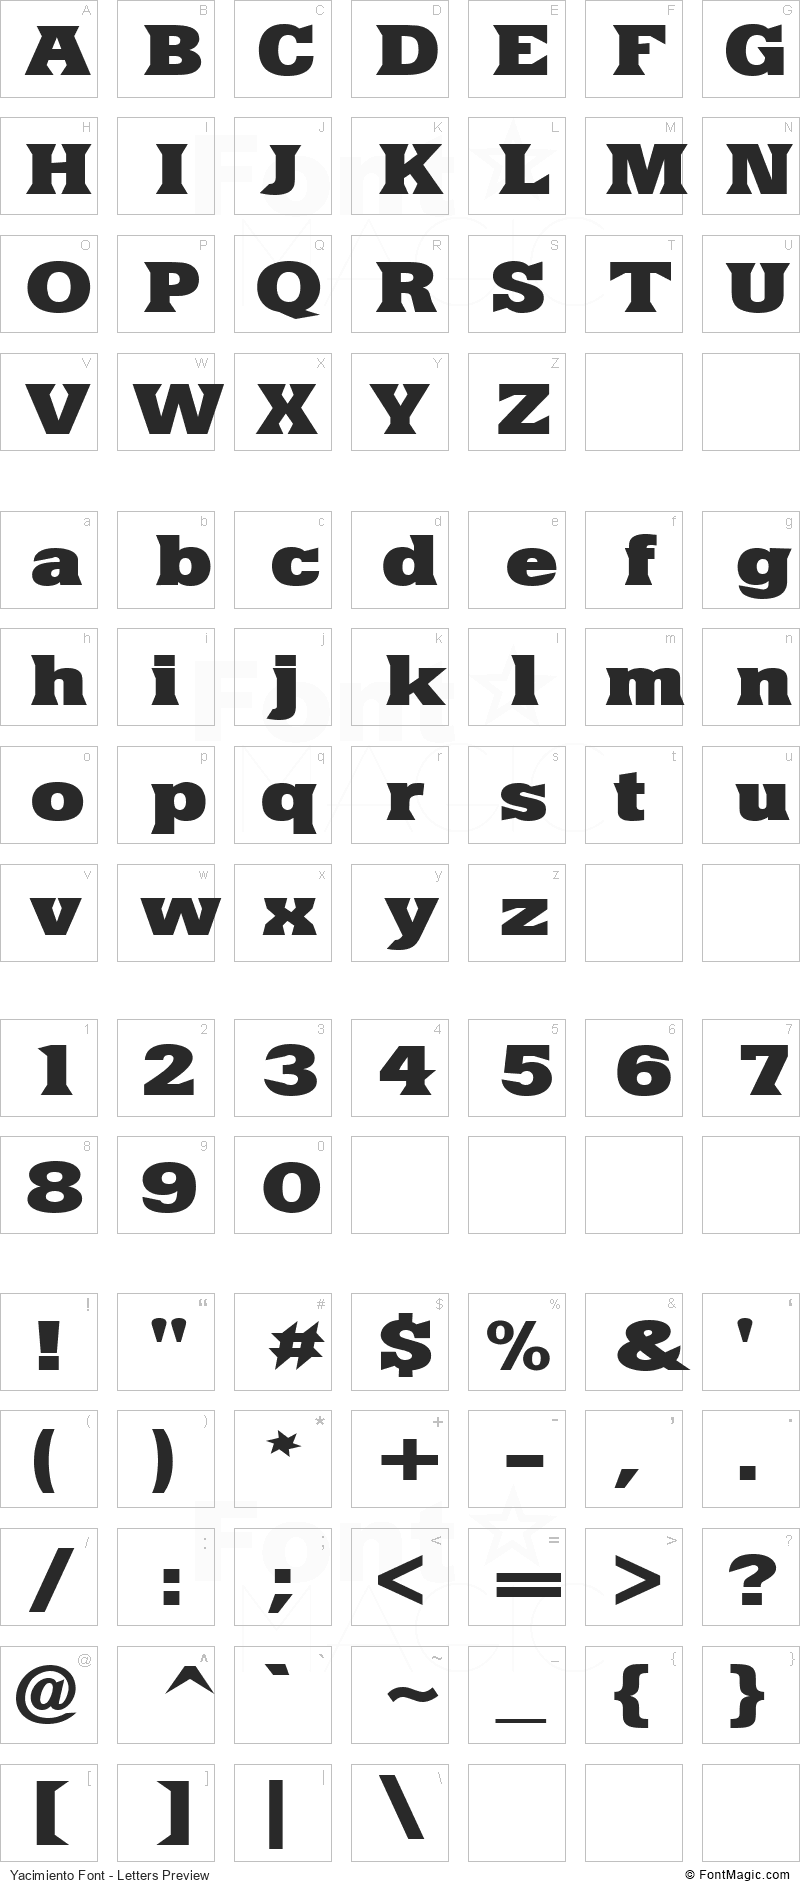 Yacimiento Font - All Latters Preview Chart